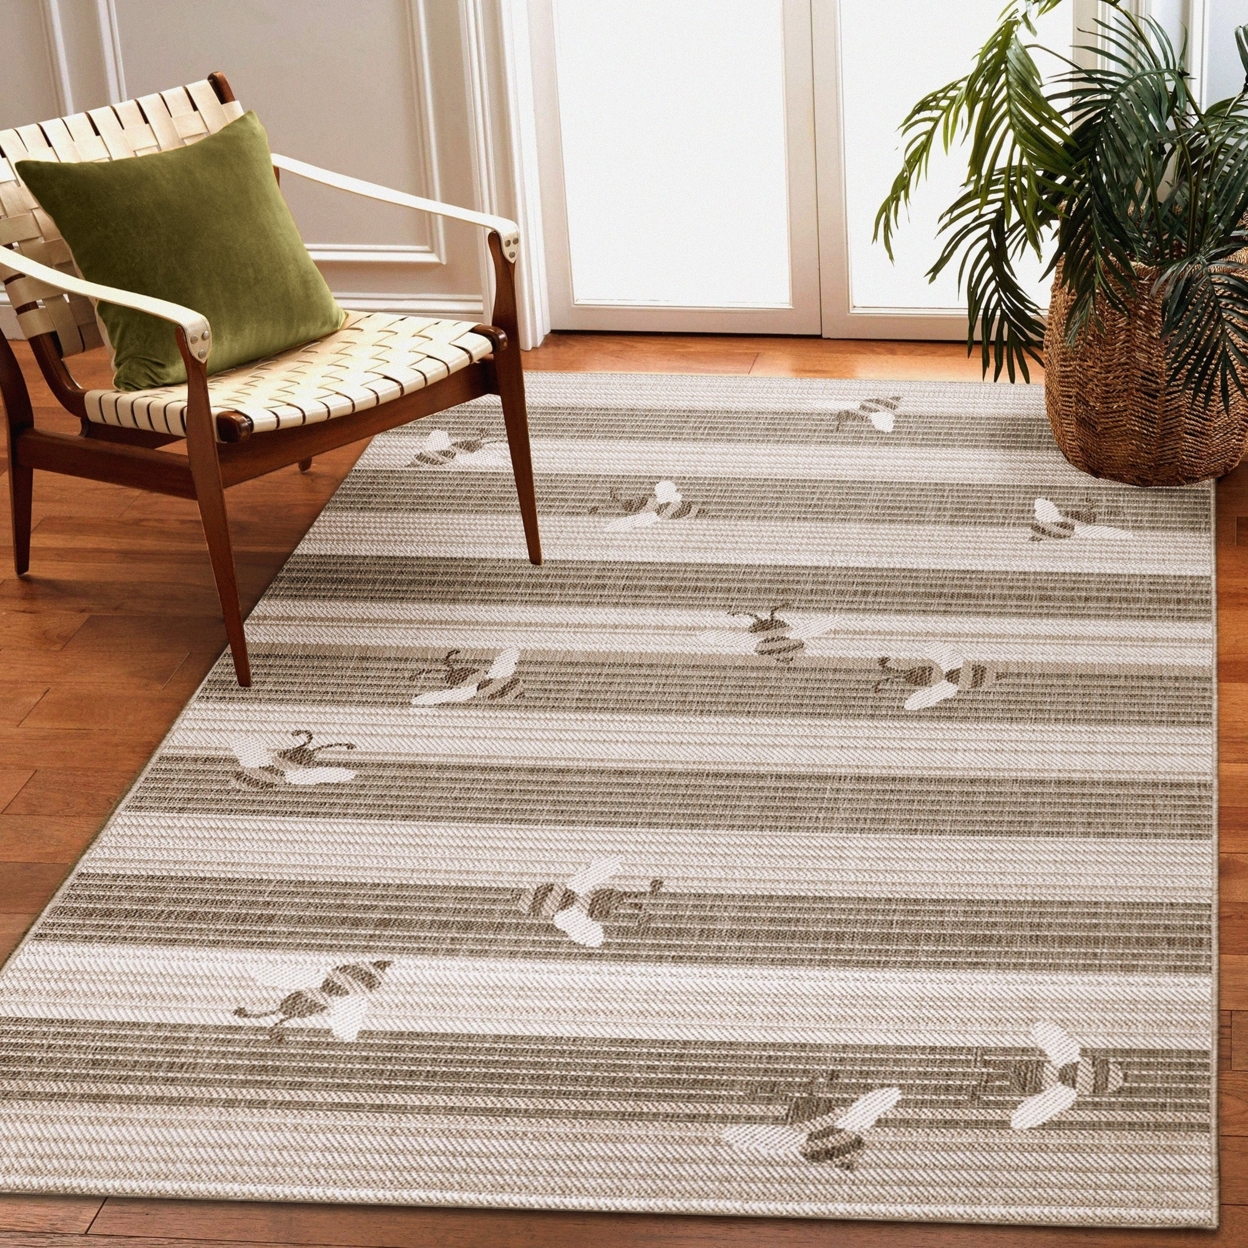 Liora Manne Malibu Sweet Bees Indoor Outdoor Area Rug Neutral - 7'10 Square